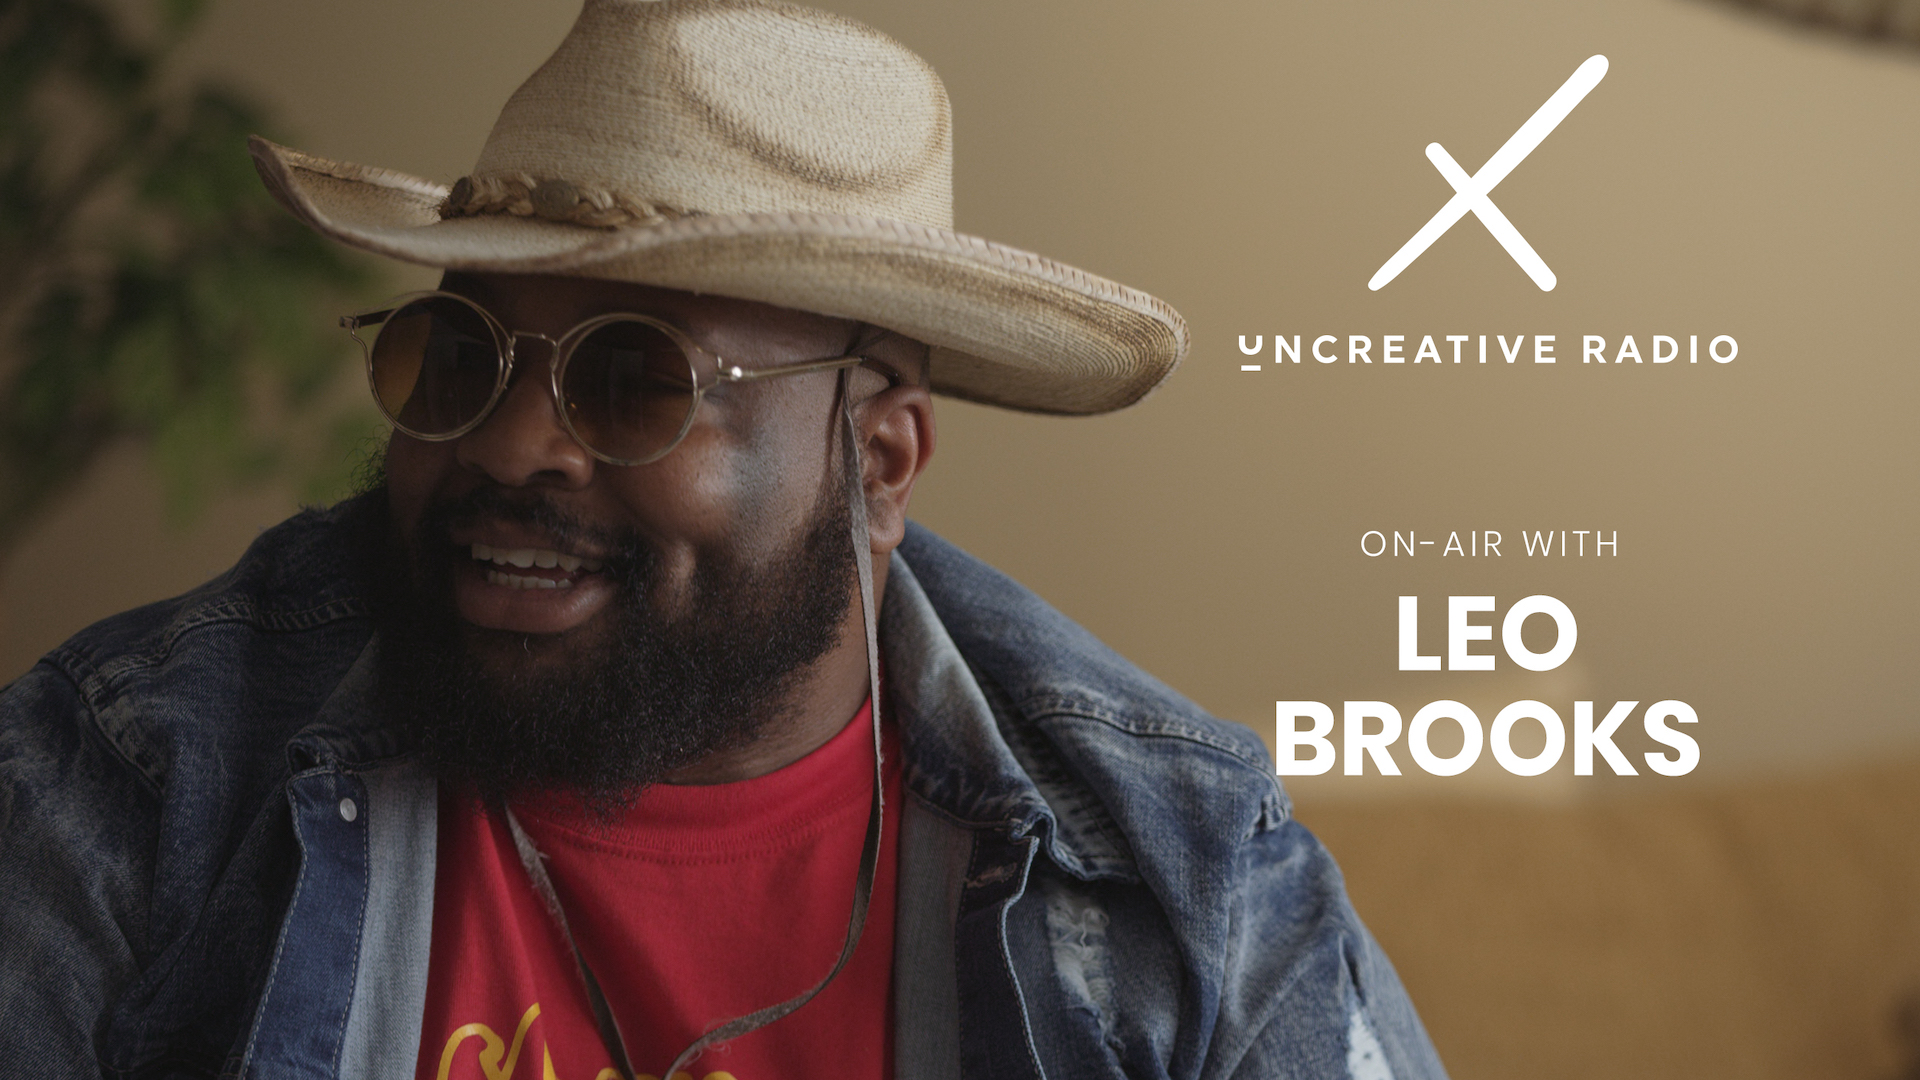 Uncreative Radio with Leo Brooks title with bearded man wearing shades and beige cowboy hat along with jean jacket and red t shirt smiling looking off to the side